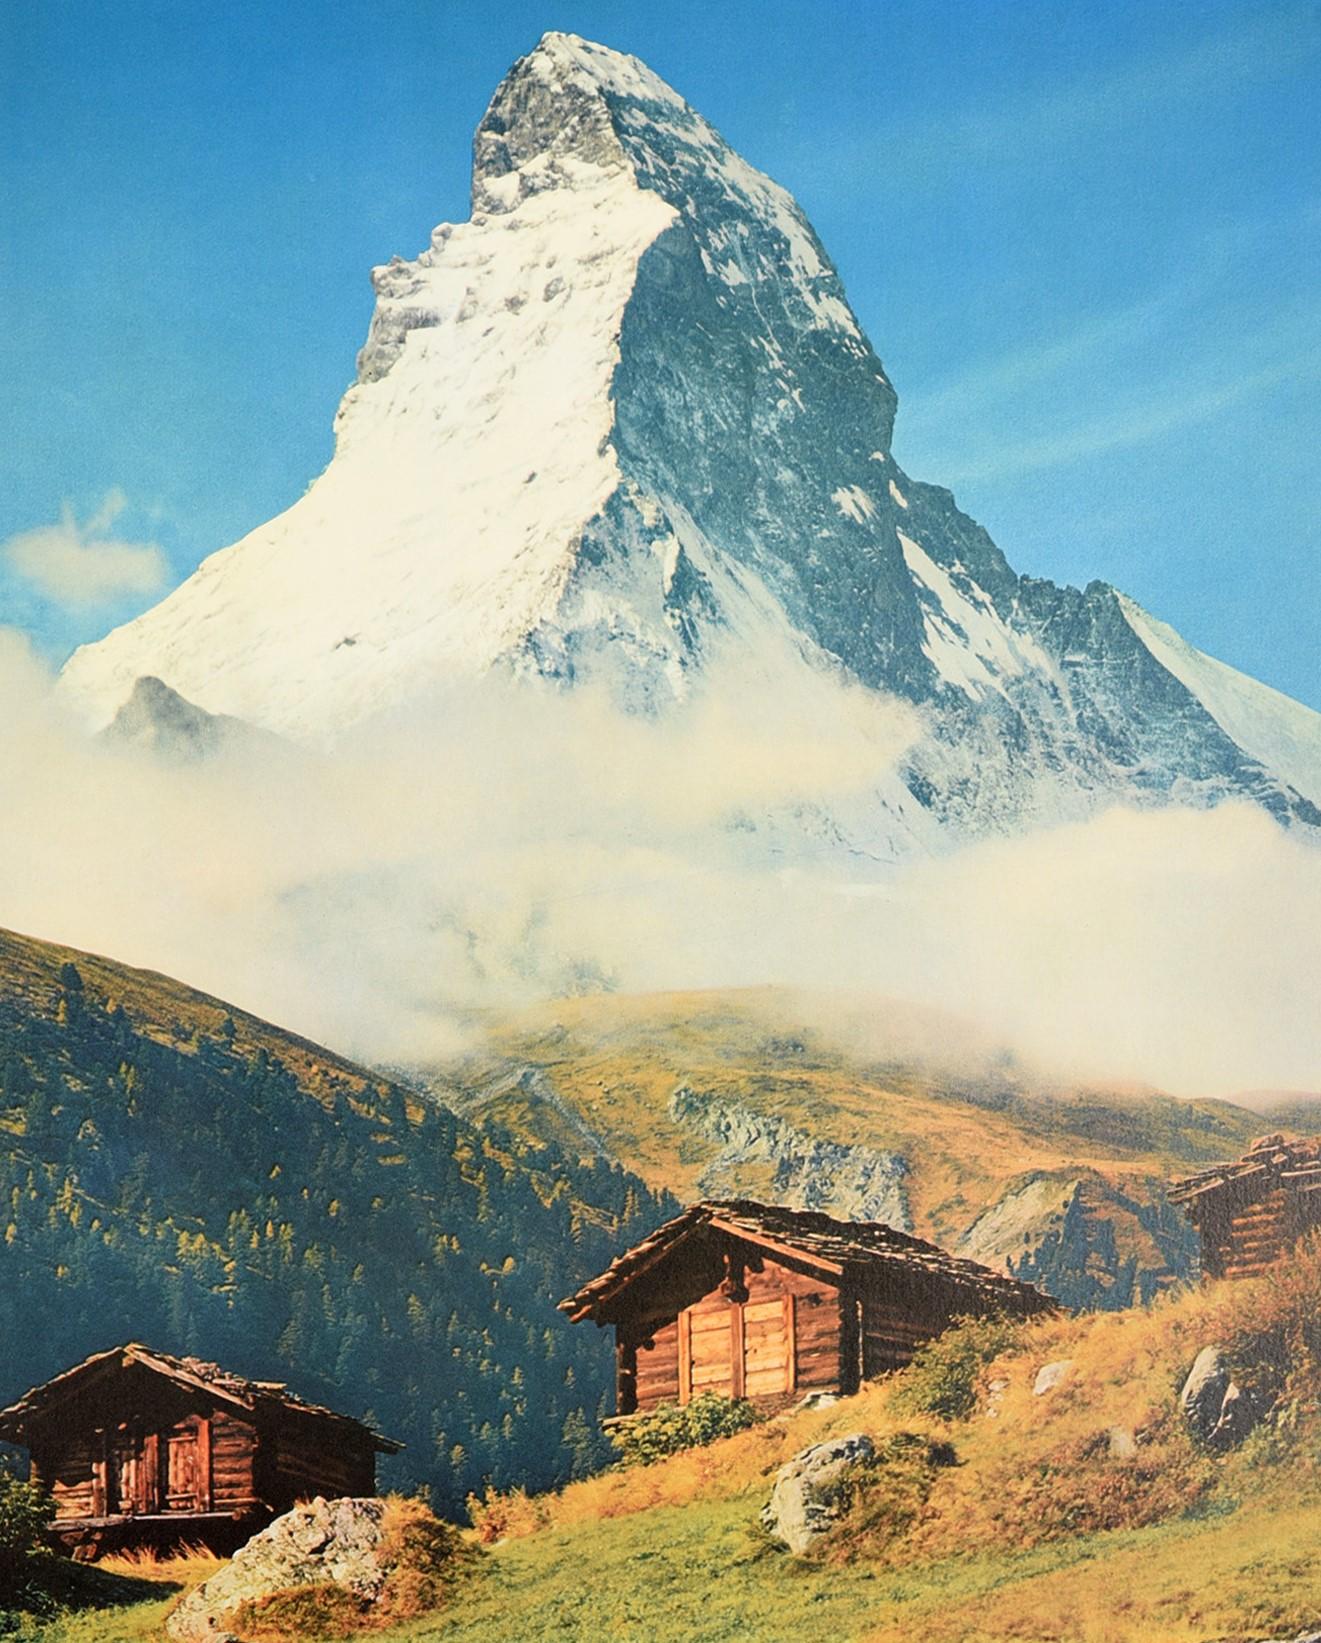 Original vintage travel poster for Zermatt in Switzerland featuring a scenic view looking up towards the snow topped Matterhorn mountain (Cervin) through a thin layer of cloud from wooden chalets and rocks in a field below. Very good condition,